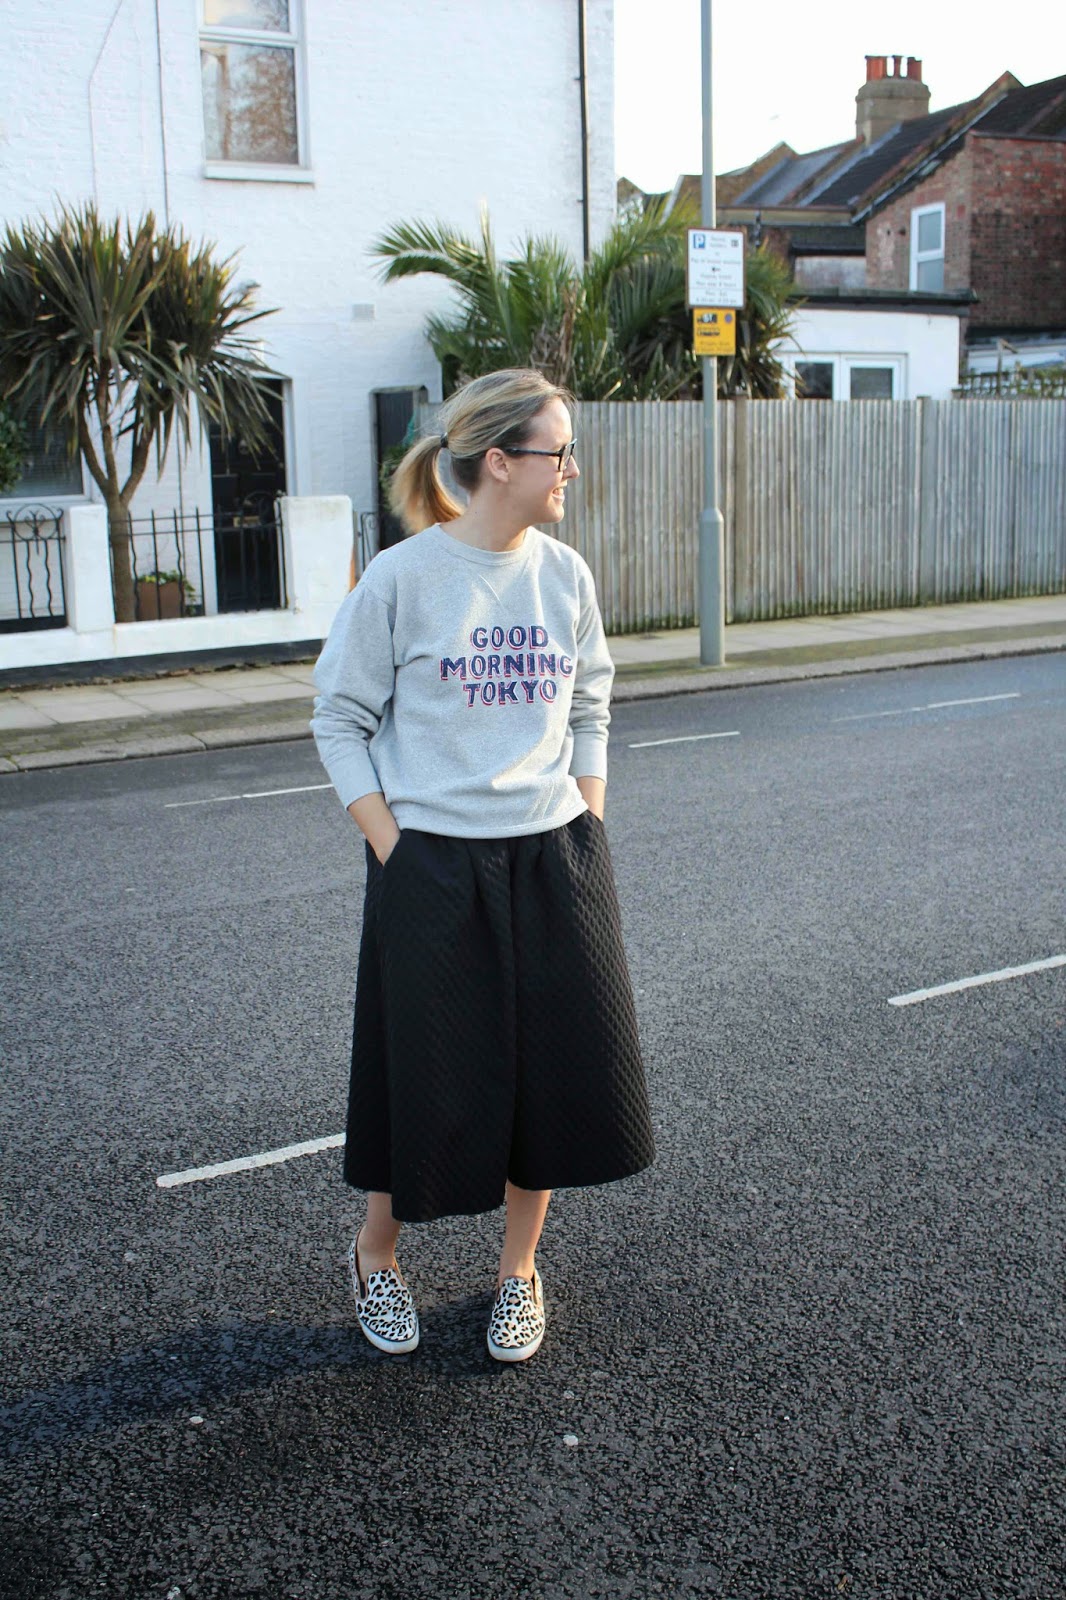 How to wear your full skirt…